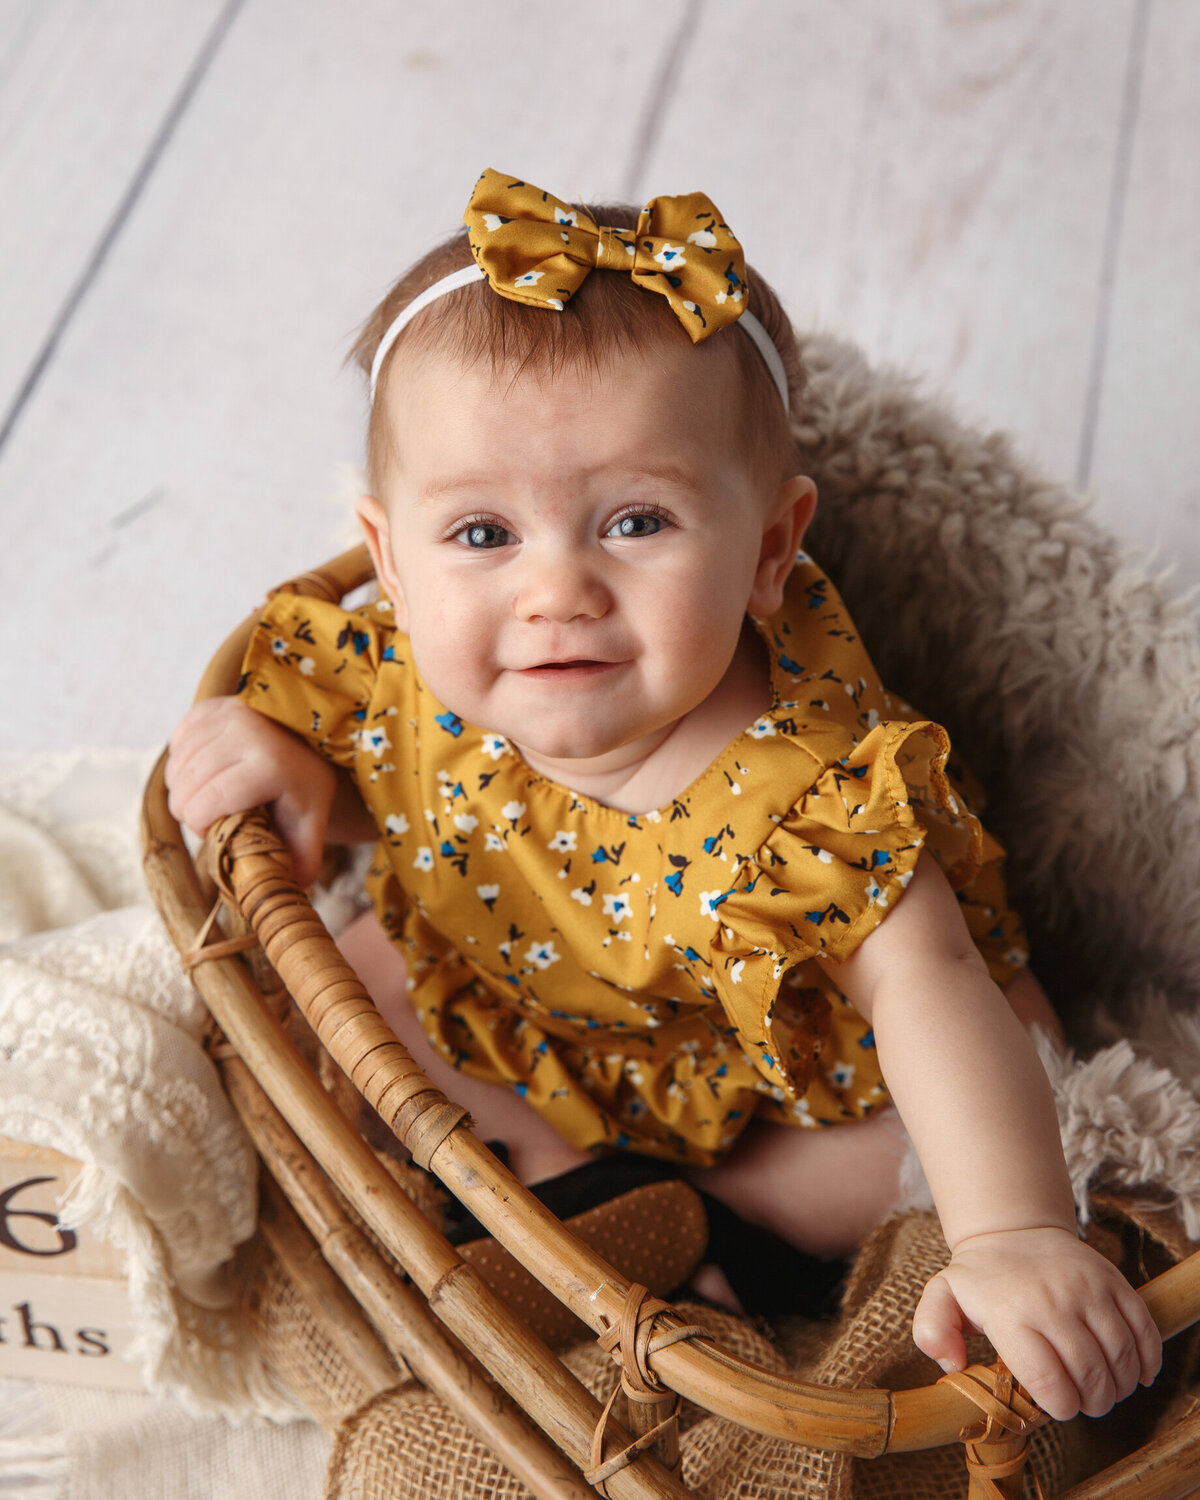 Cute baby girl in a yellow dress sitting in a wooden basket and smiling at the camera.